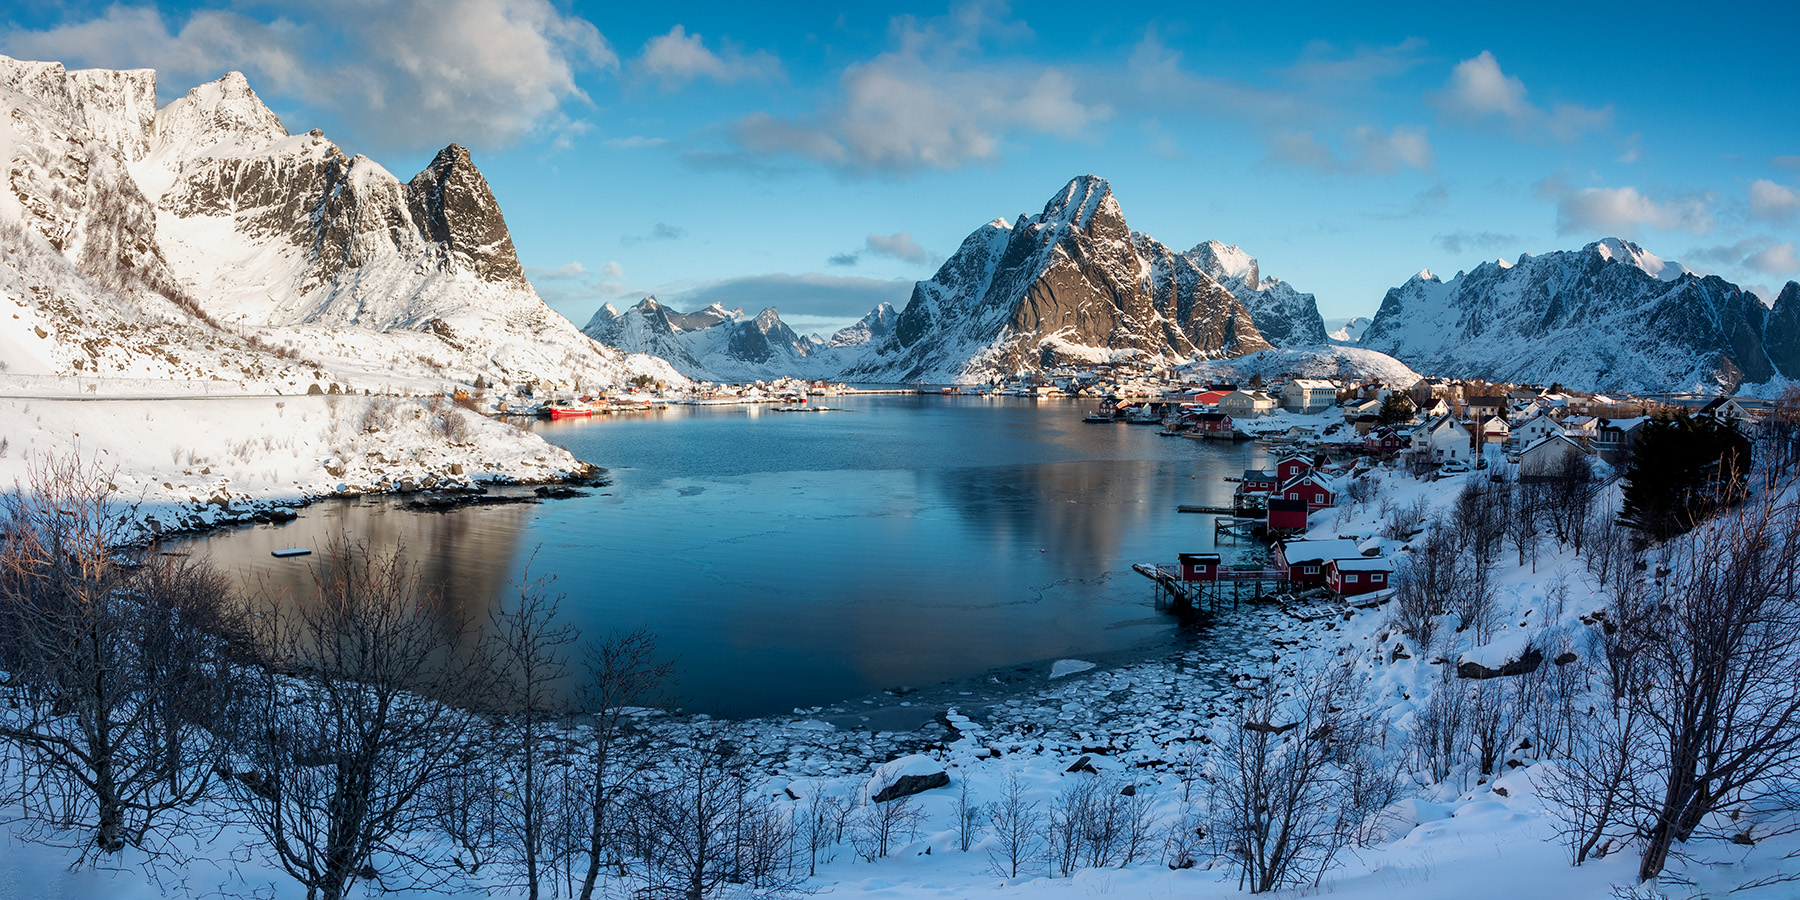 General 1800x900 snow snowy mountain clouds winter trees fall house lake sunrise landscape Reine Norway